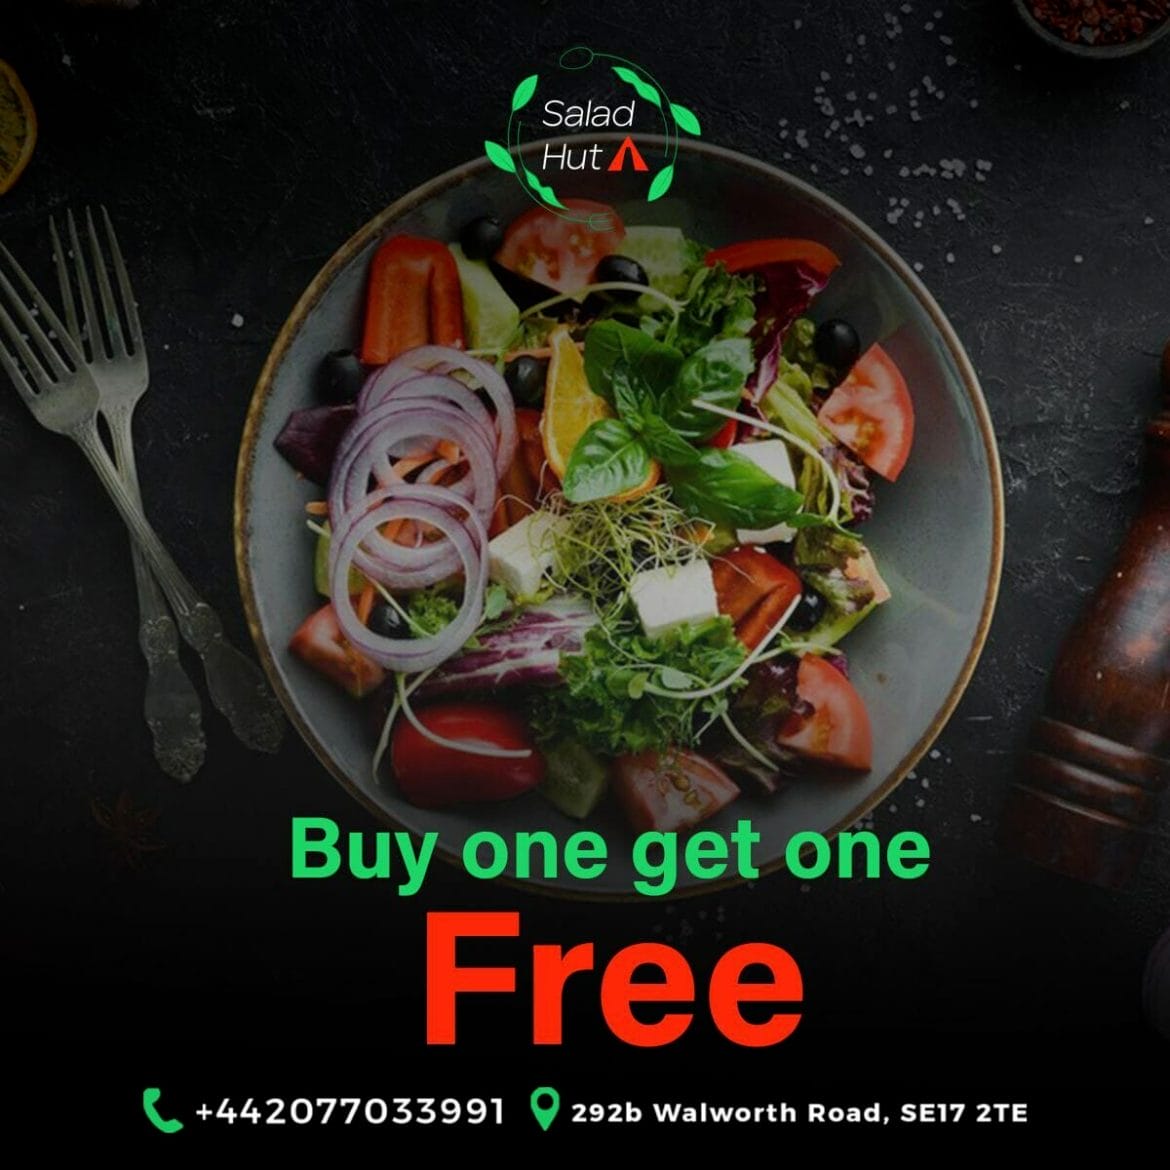 Salad Hut Offer Buy One Get One Free Share and Save